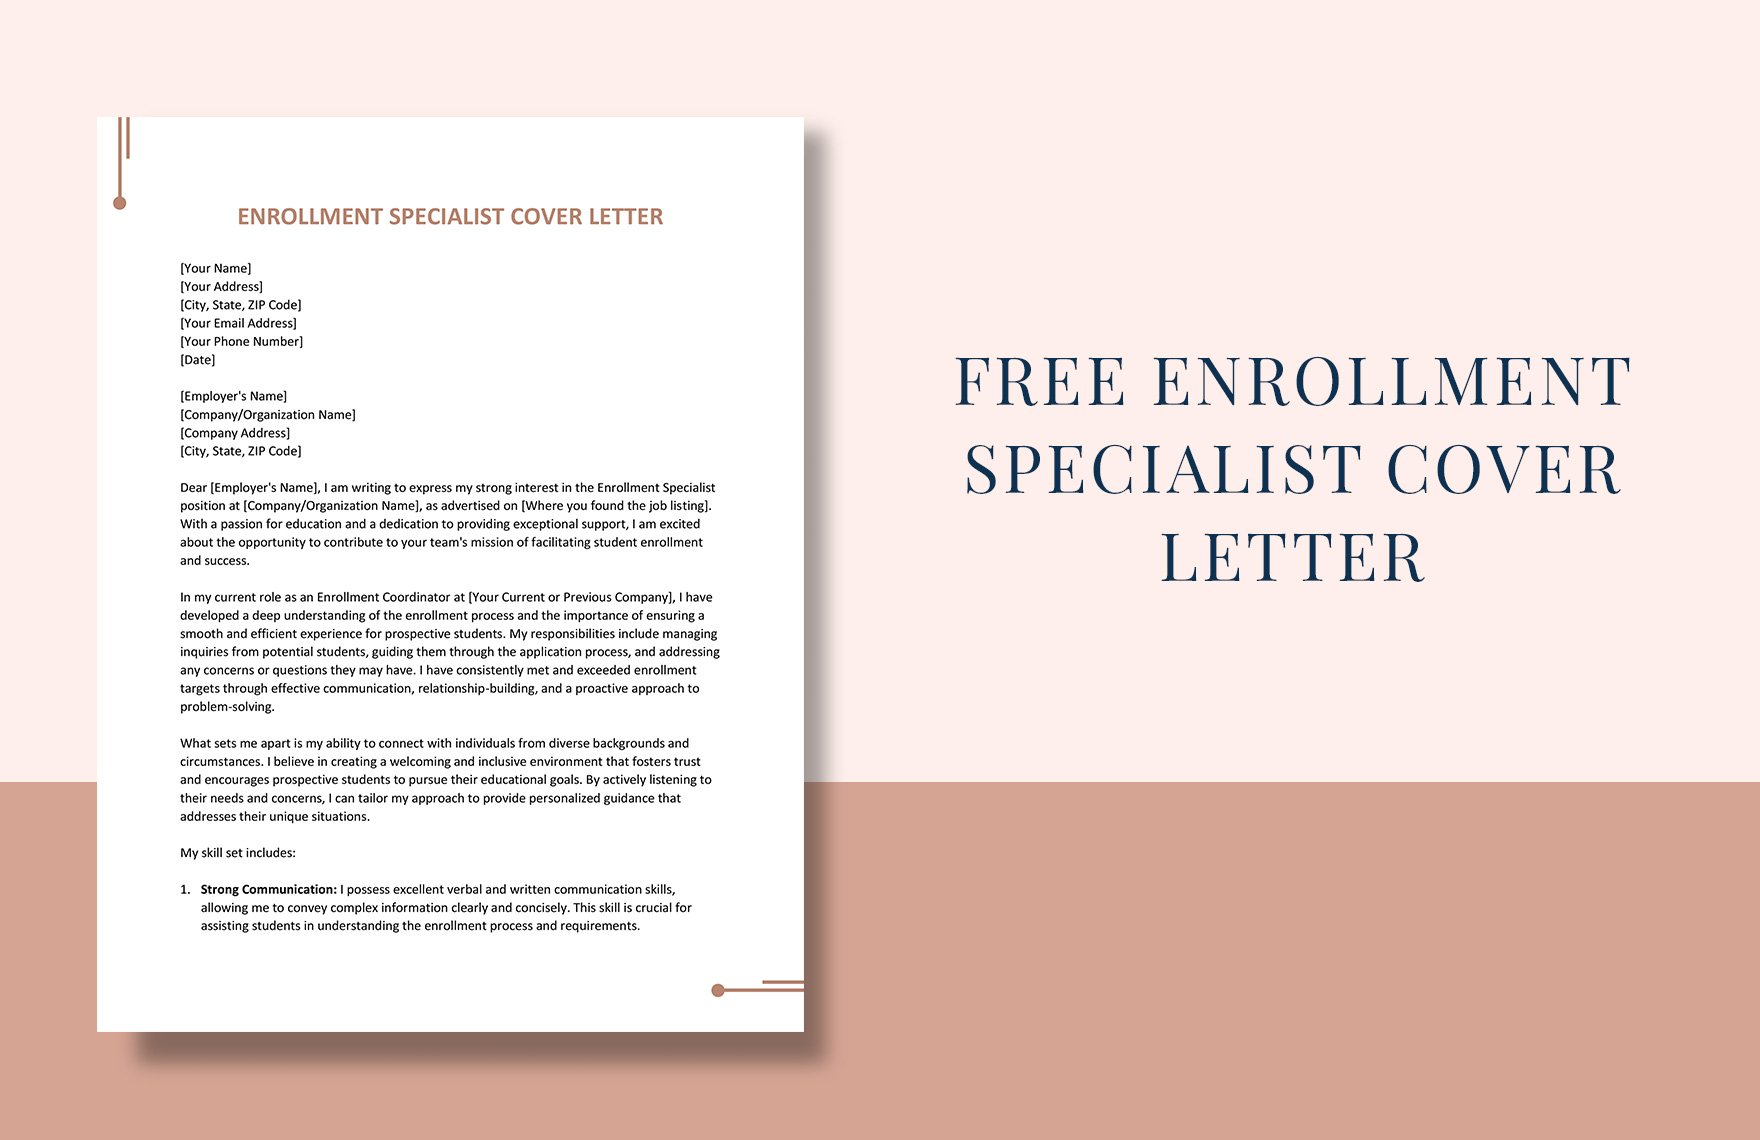 Enrollment Specialist Cover Letter in Word, Google Docs, Apple Pages